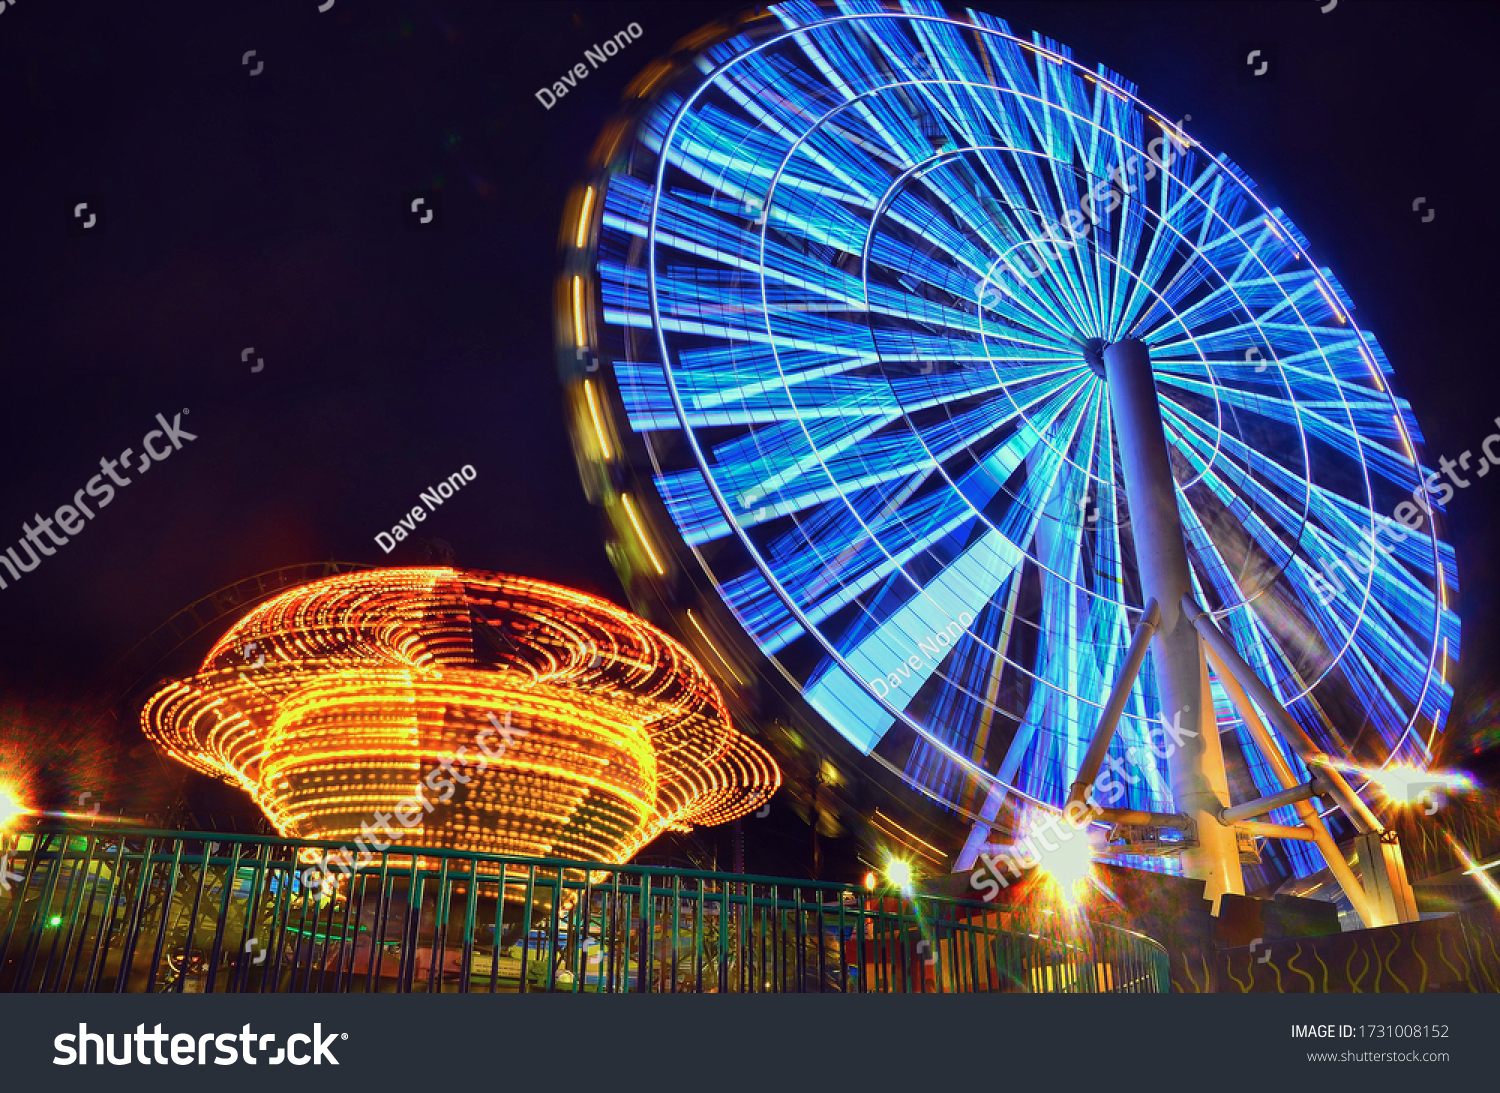 A beauty of a carnival at night. Time lapse photography of a Ferris wheel.  #1731008152